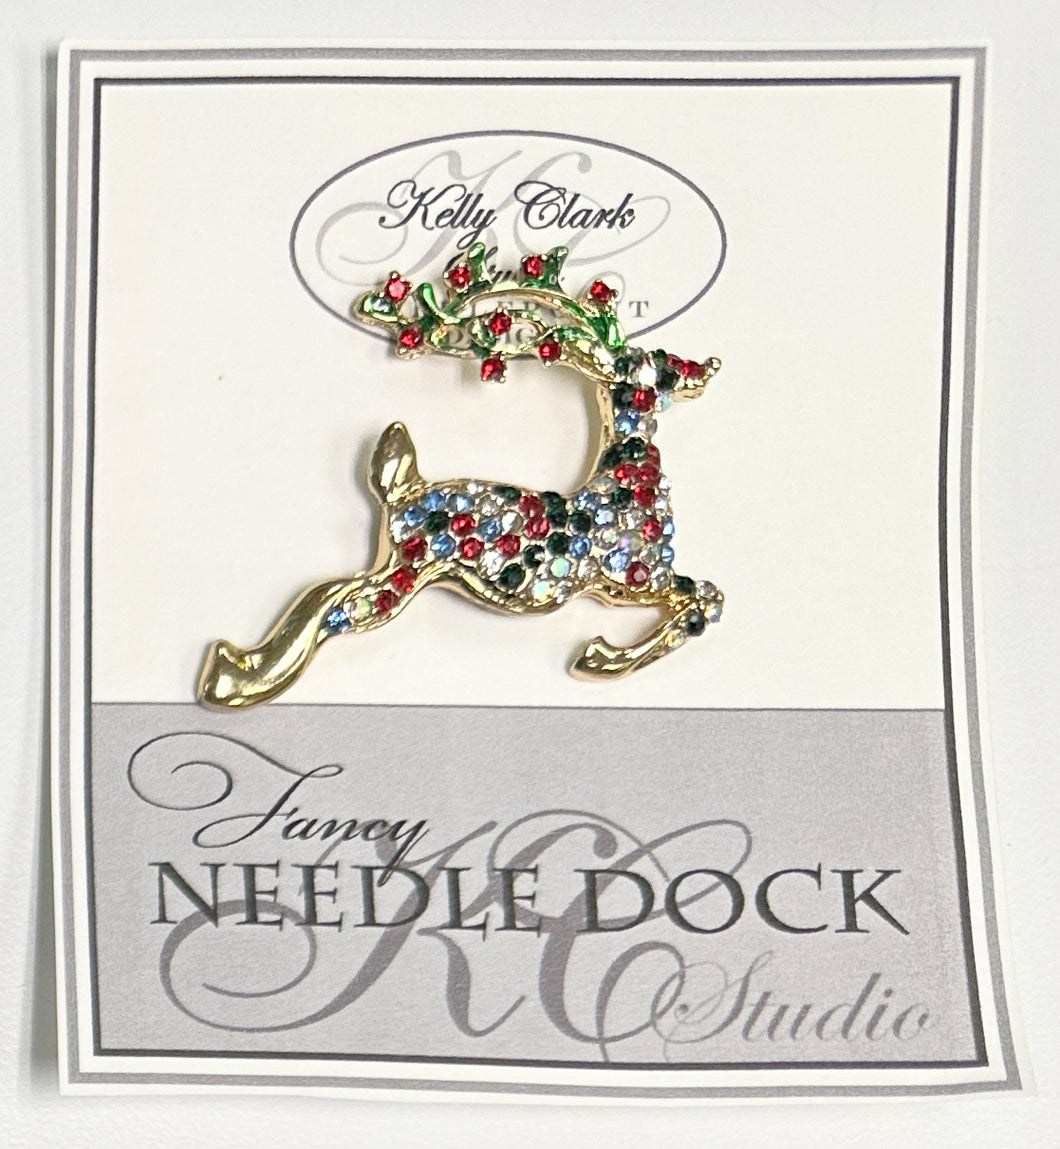 multi-colored leaping stag needle dock